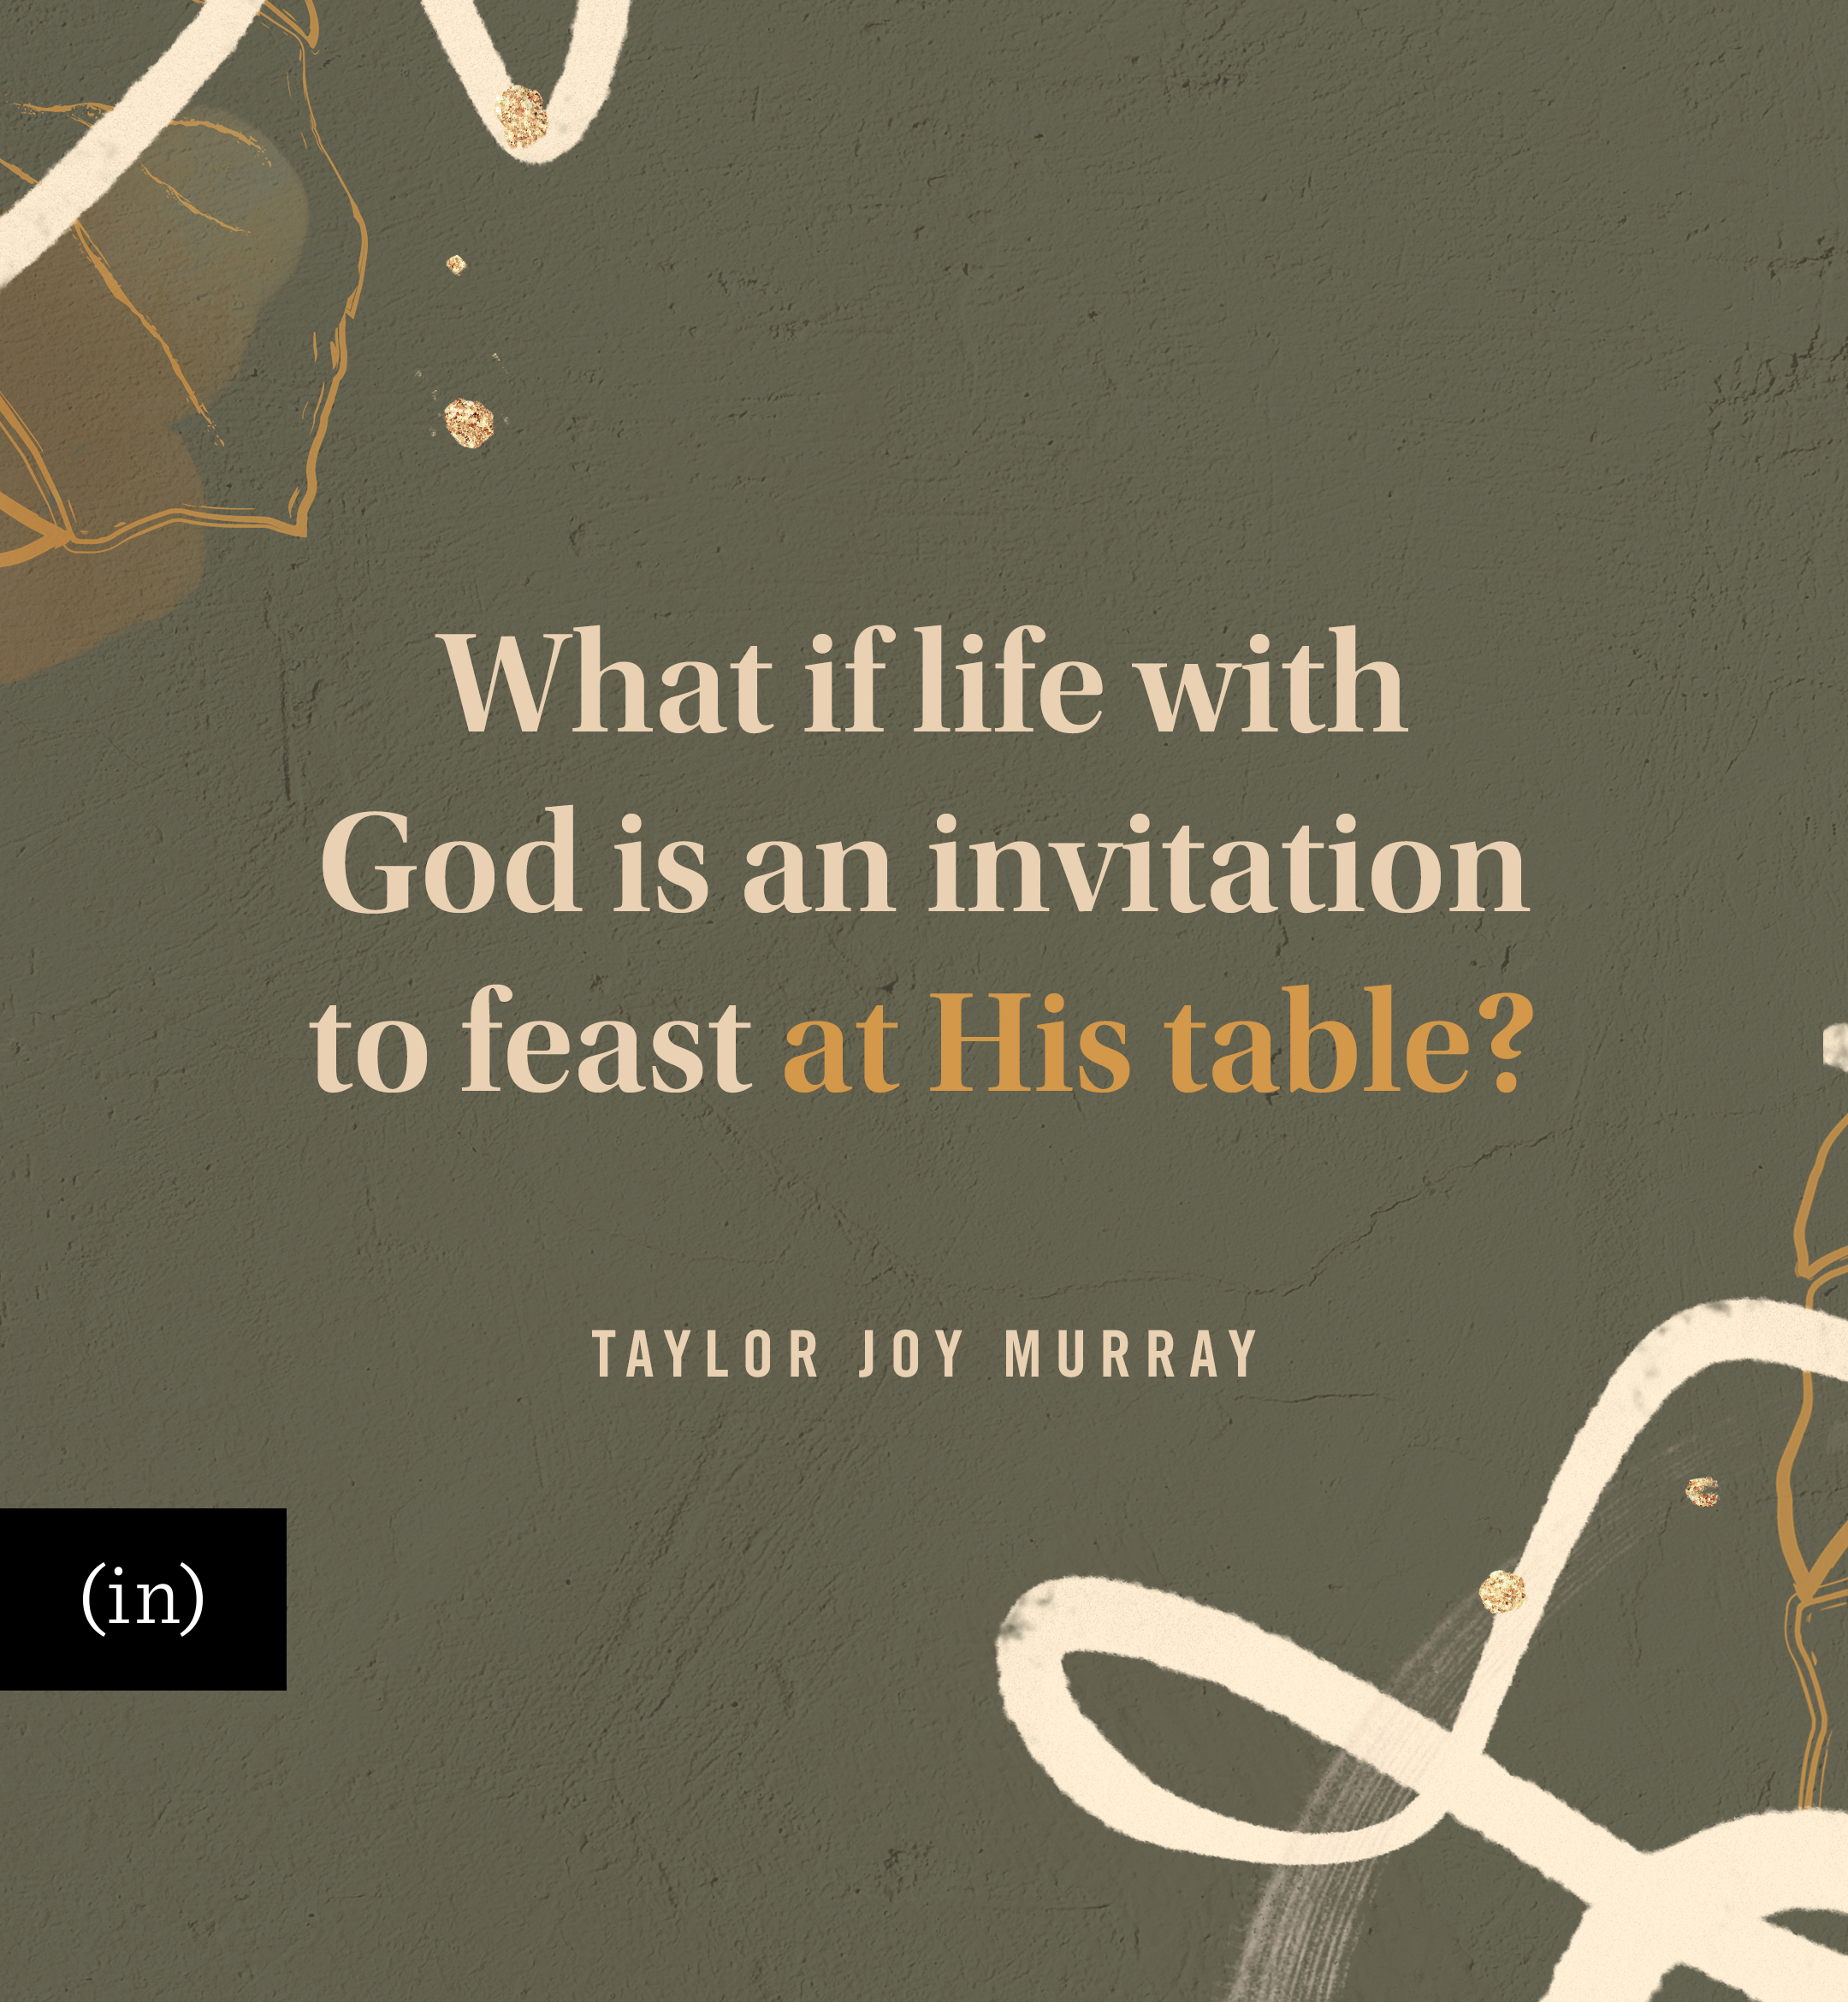 What if life with God is an invitation to feast at His table?